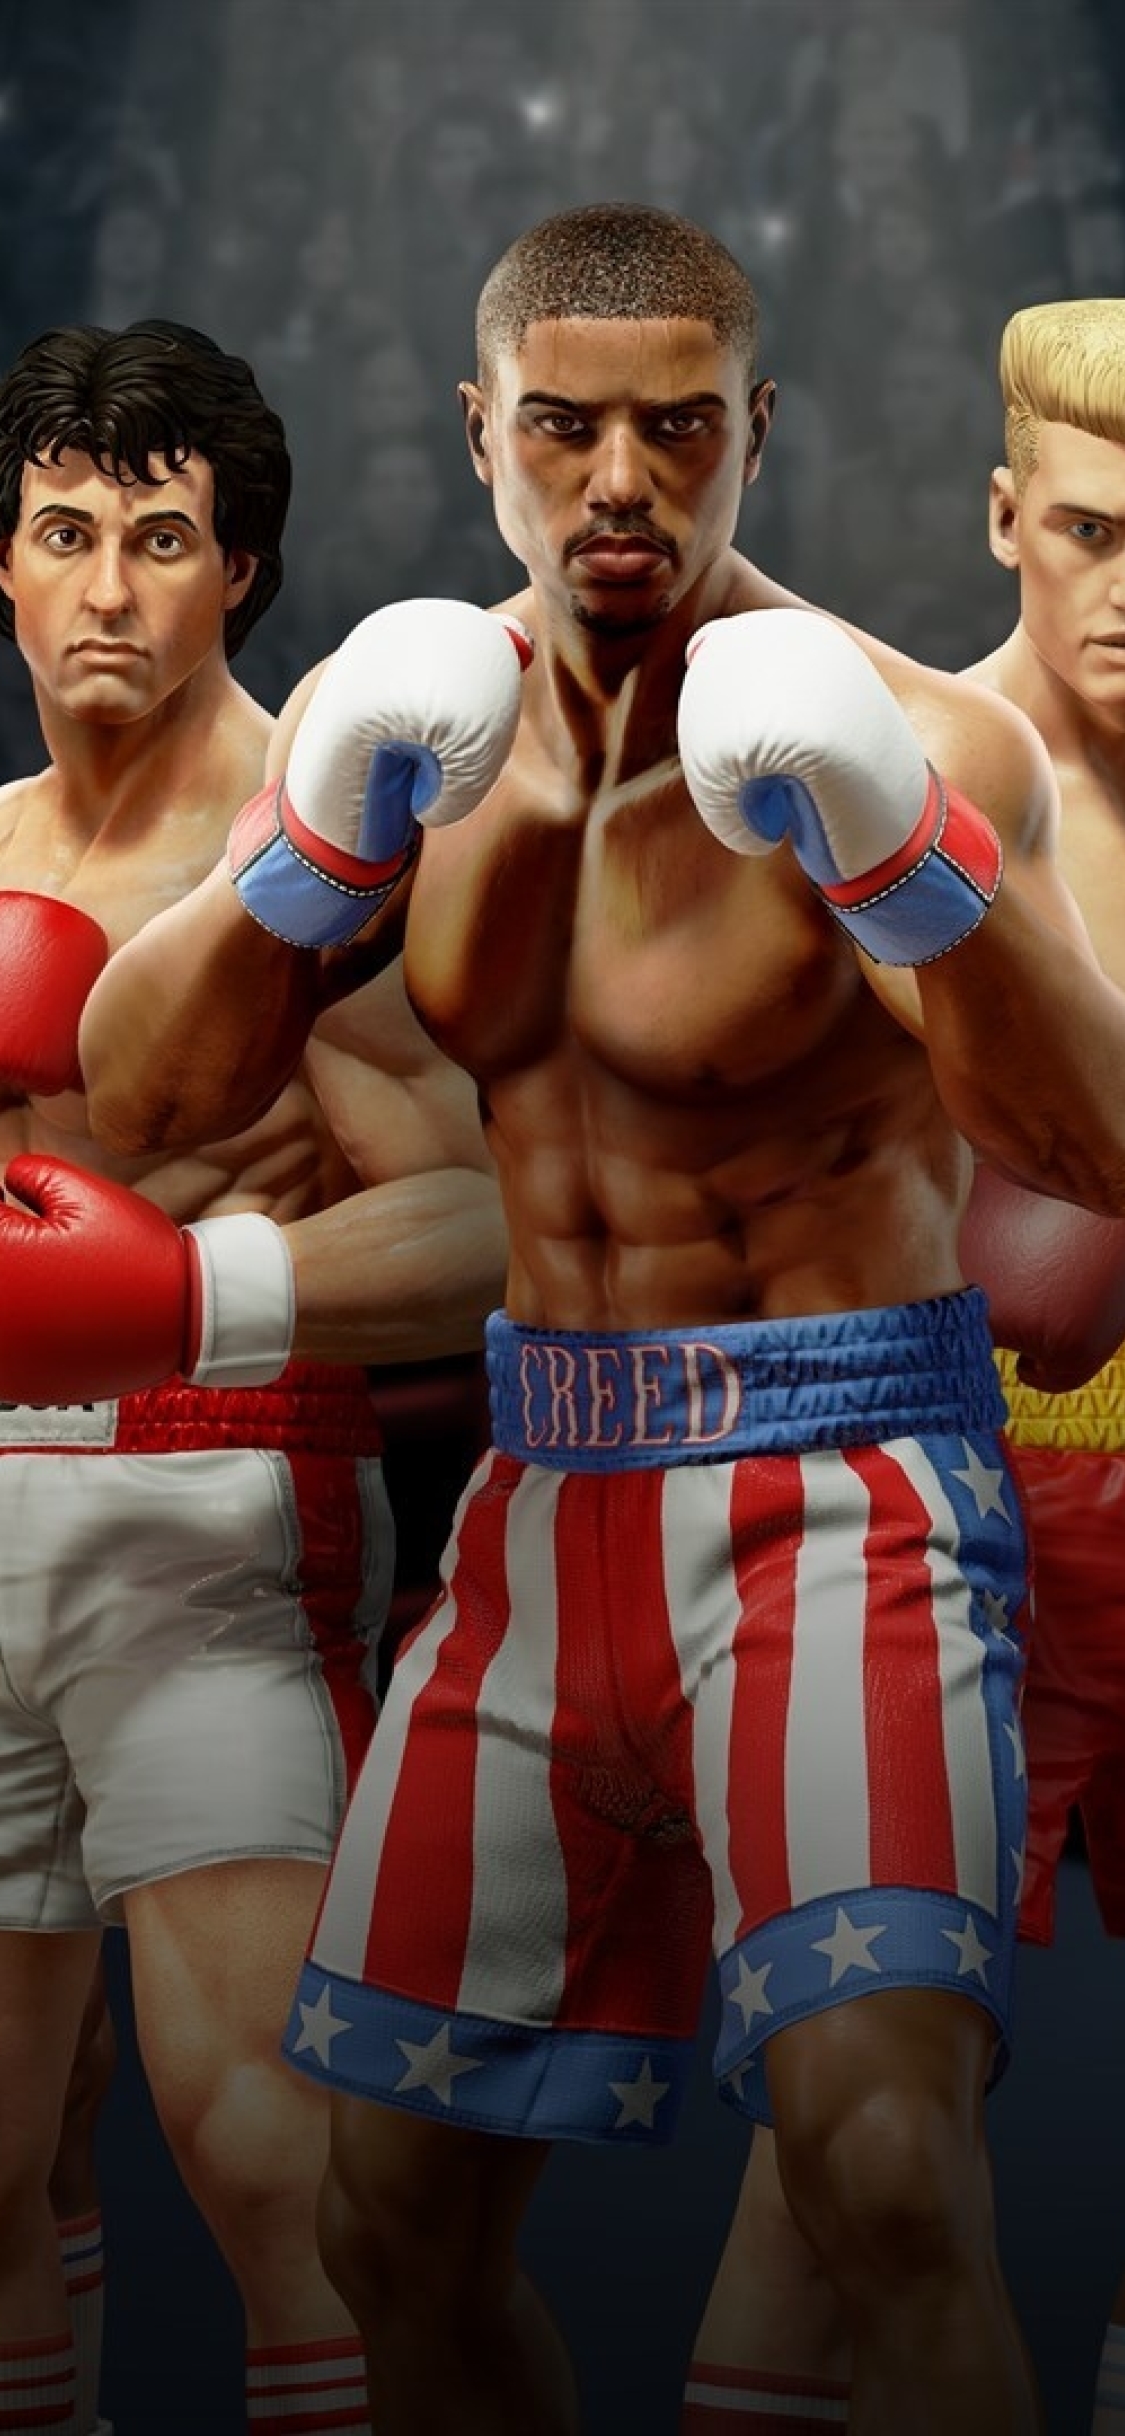 Creed II by KahlanAmnelle on DeviantArt